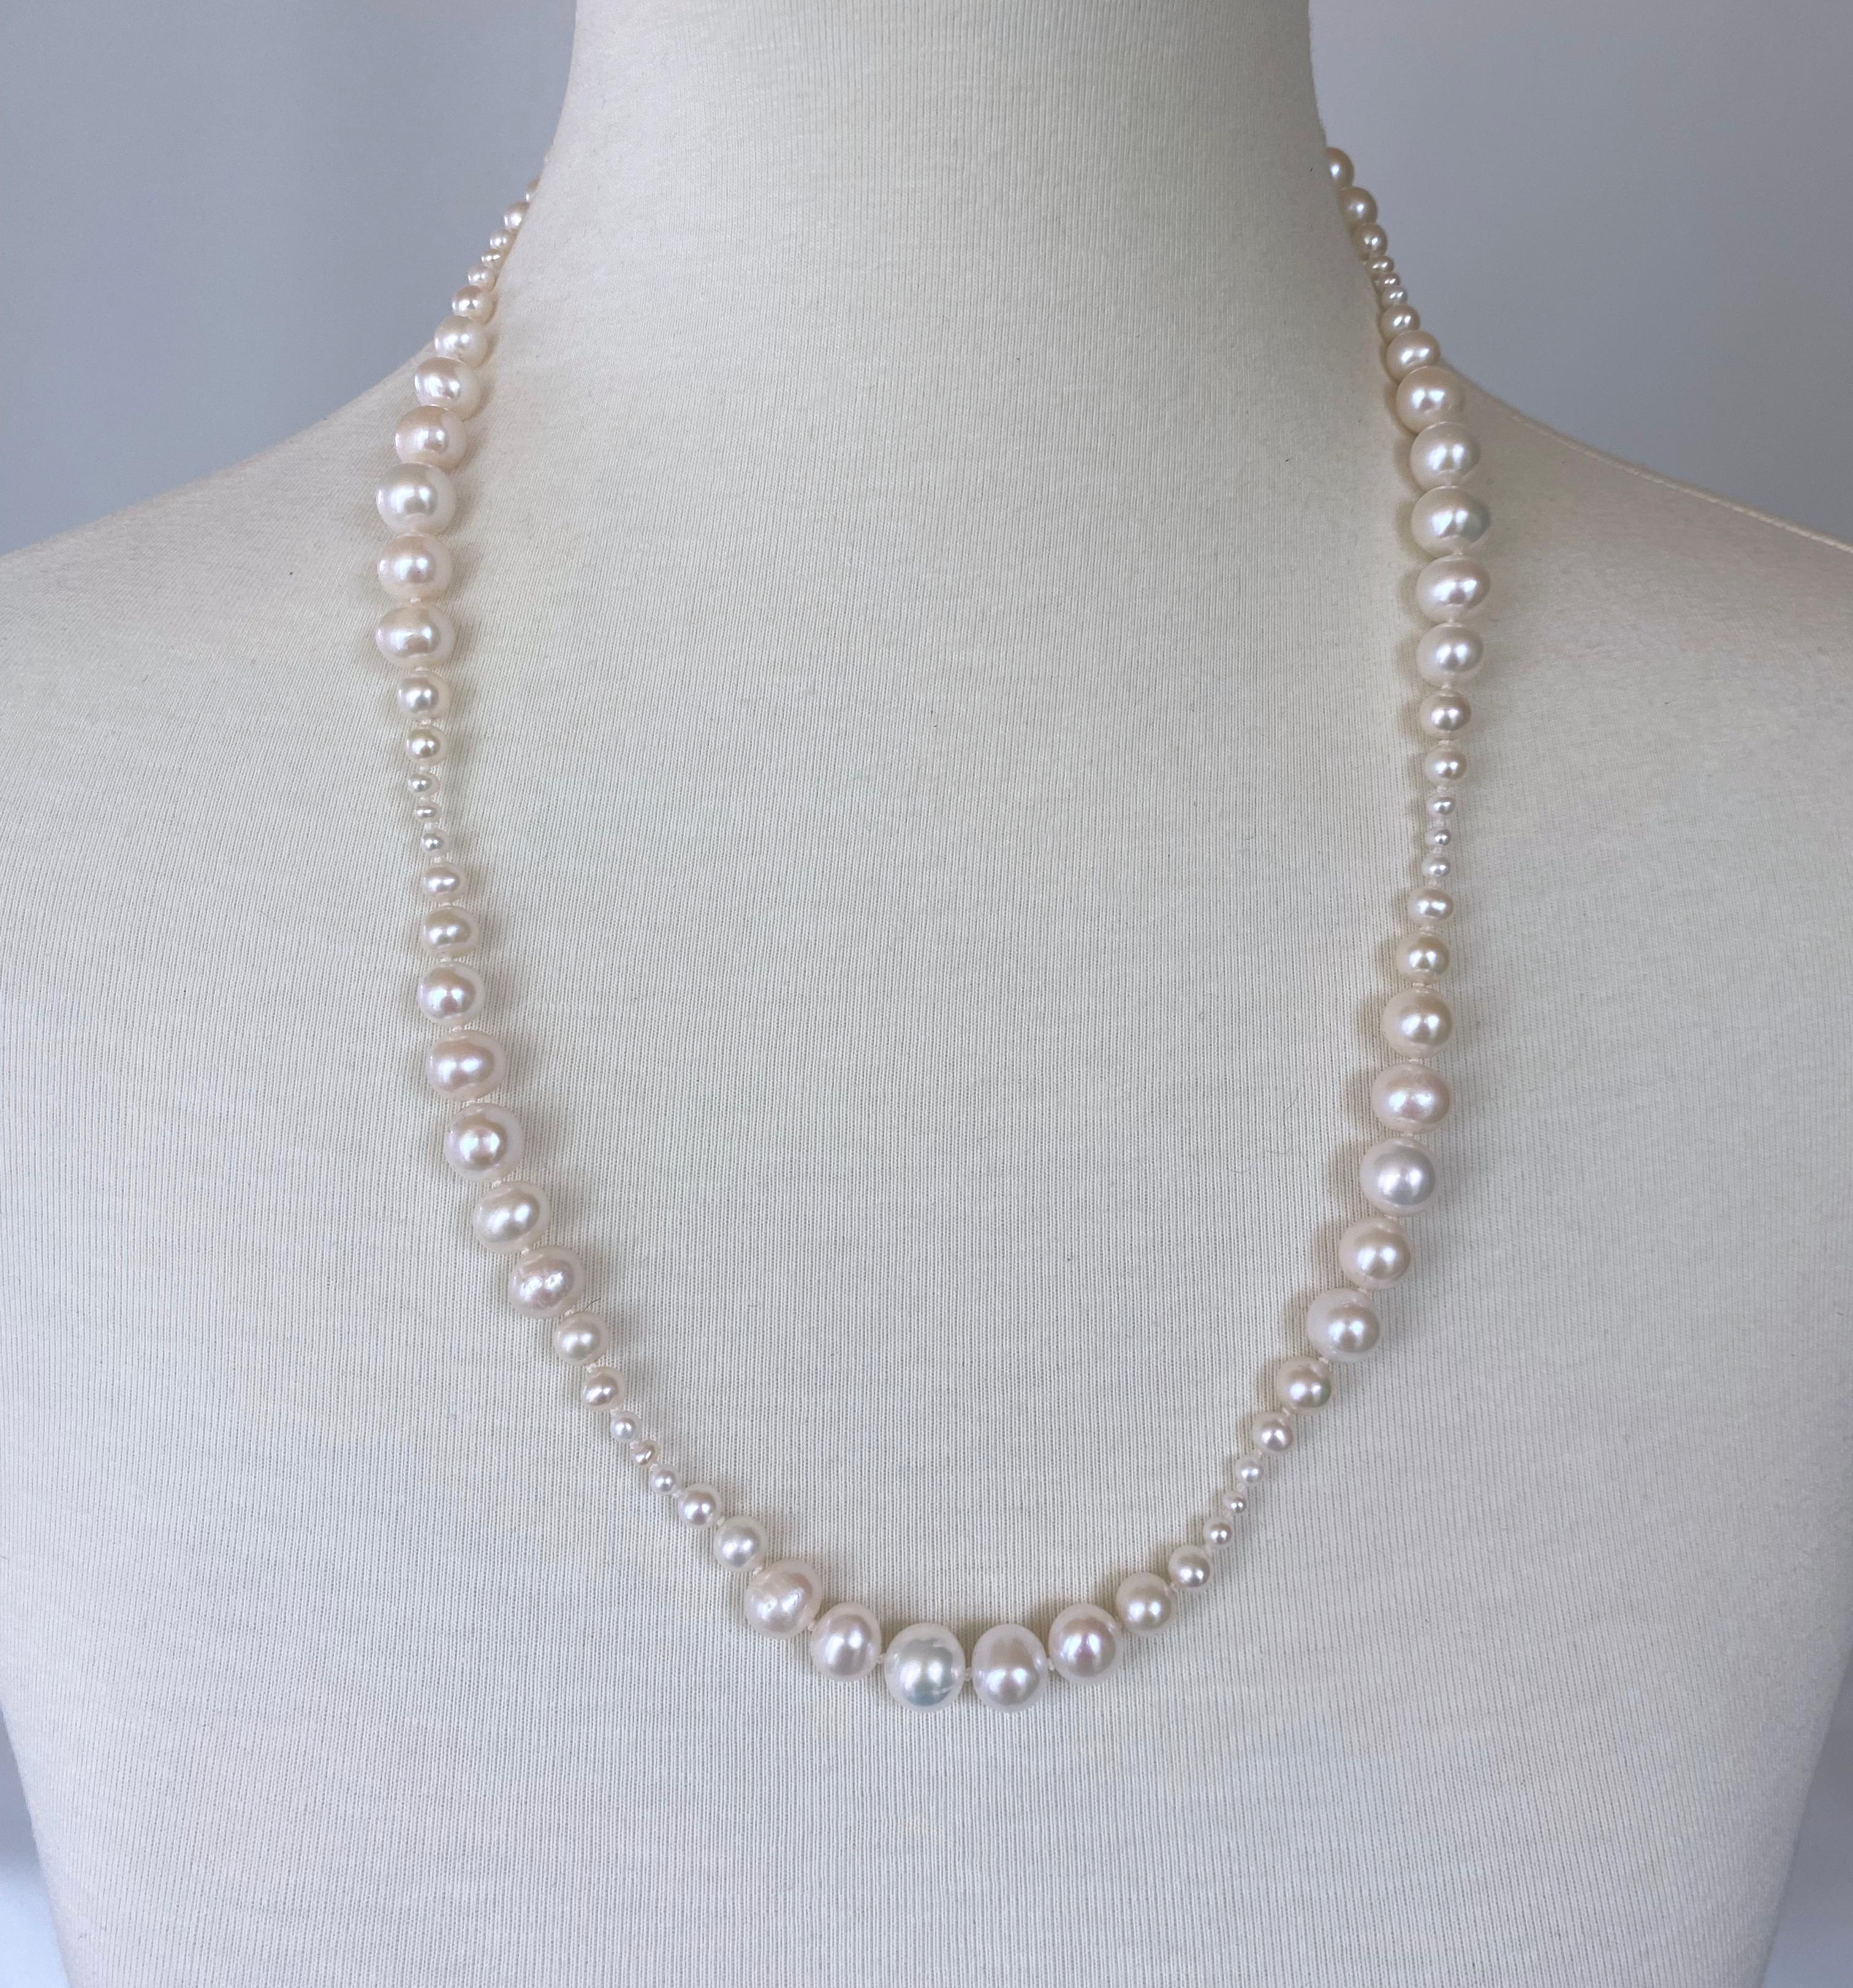 graduated pearl necklace 16 inch